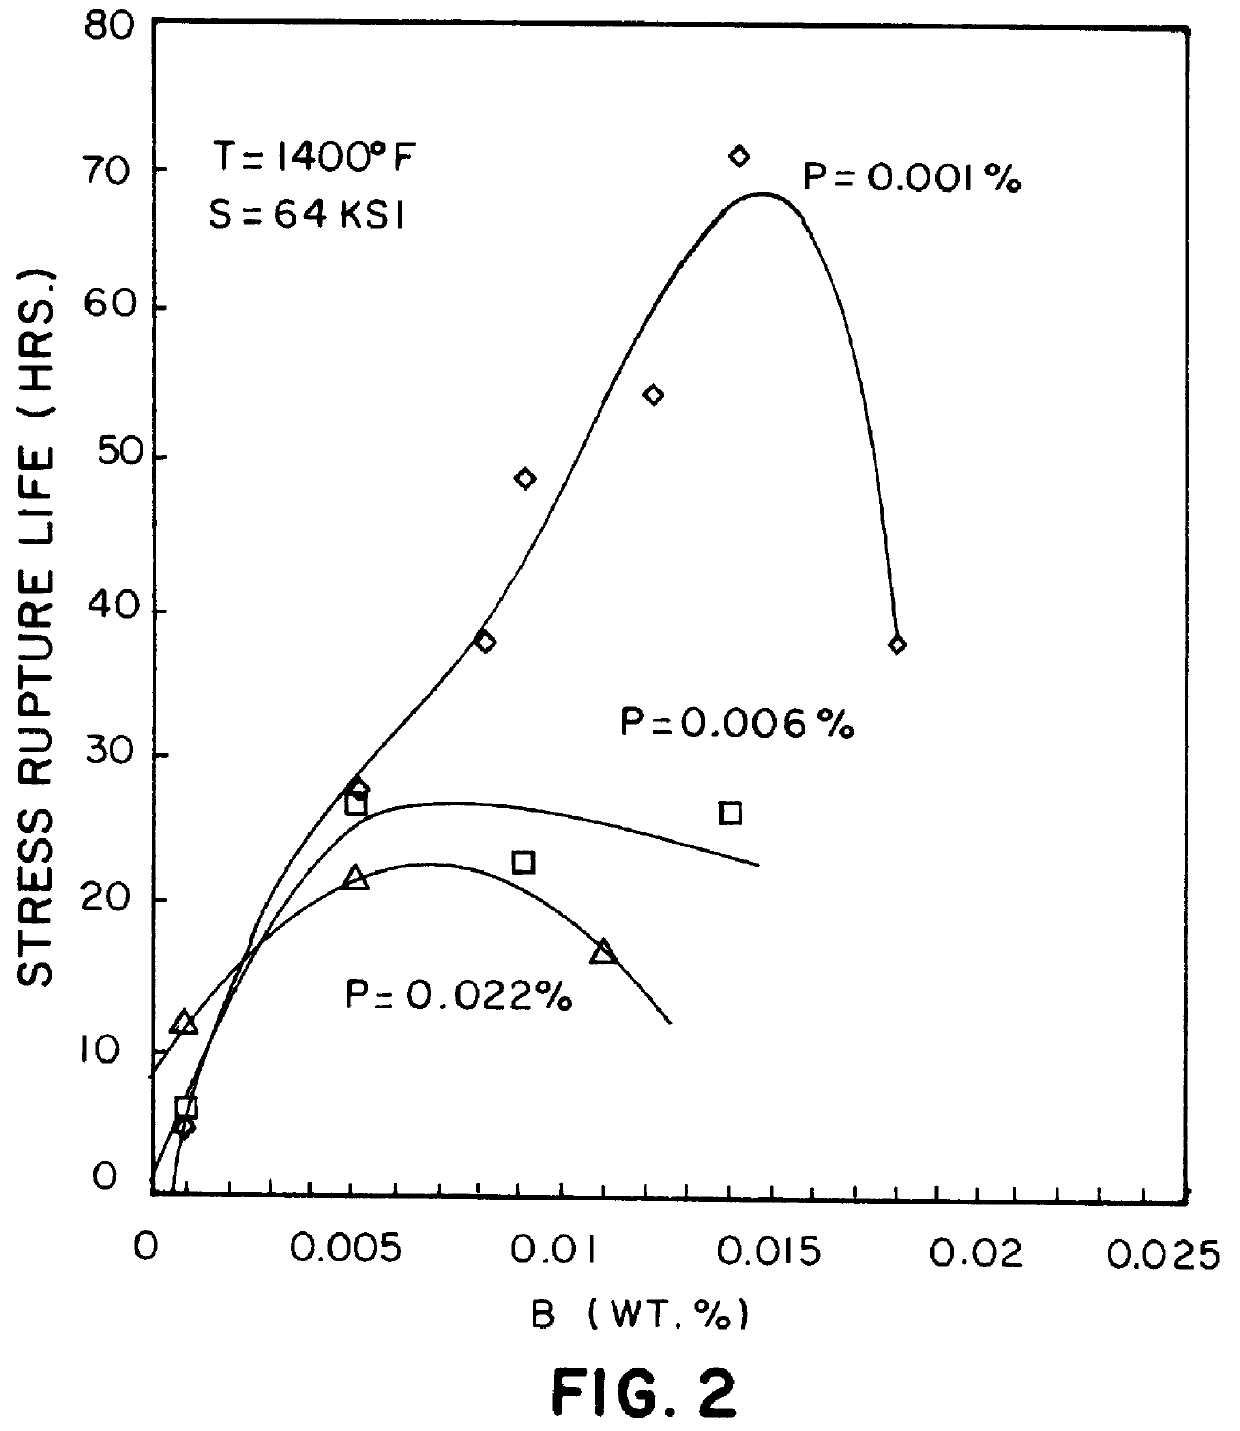 Stress rupture properties of nickel-chromium-cobalt alloys by adjustment of the levels of phosphorus and boron